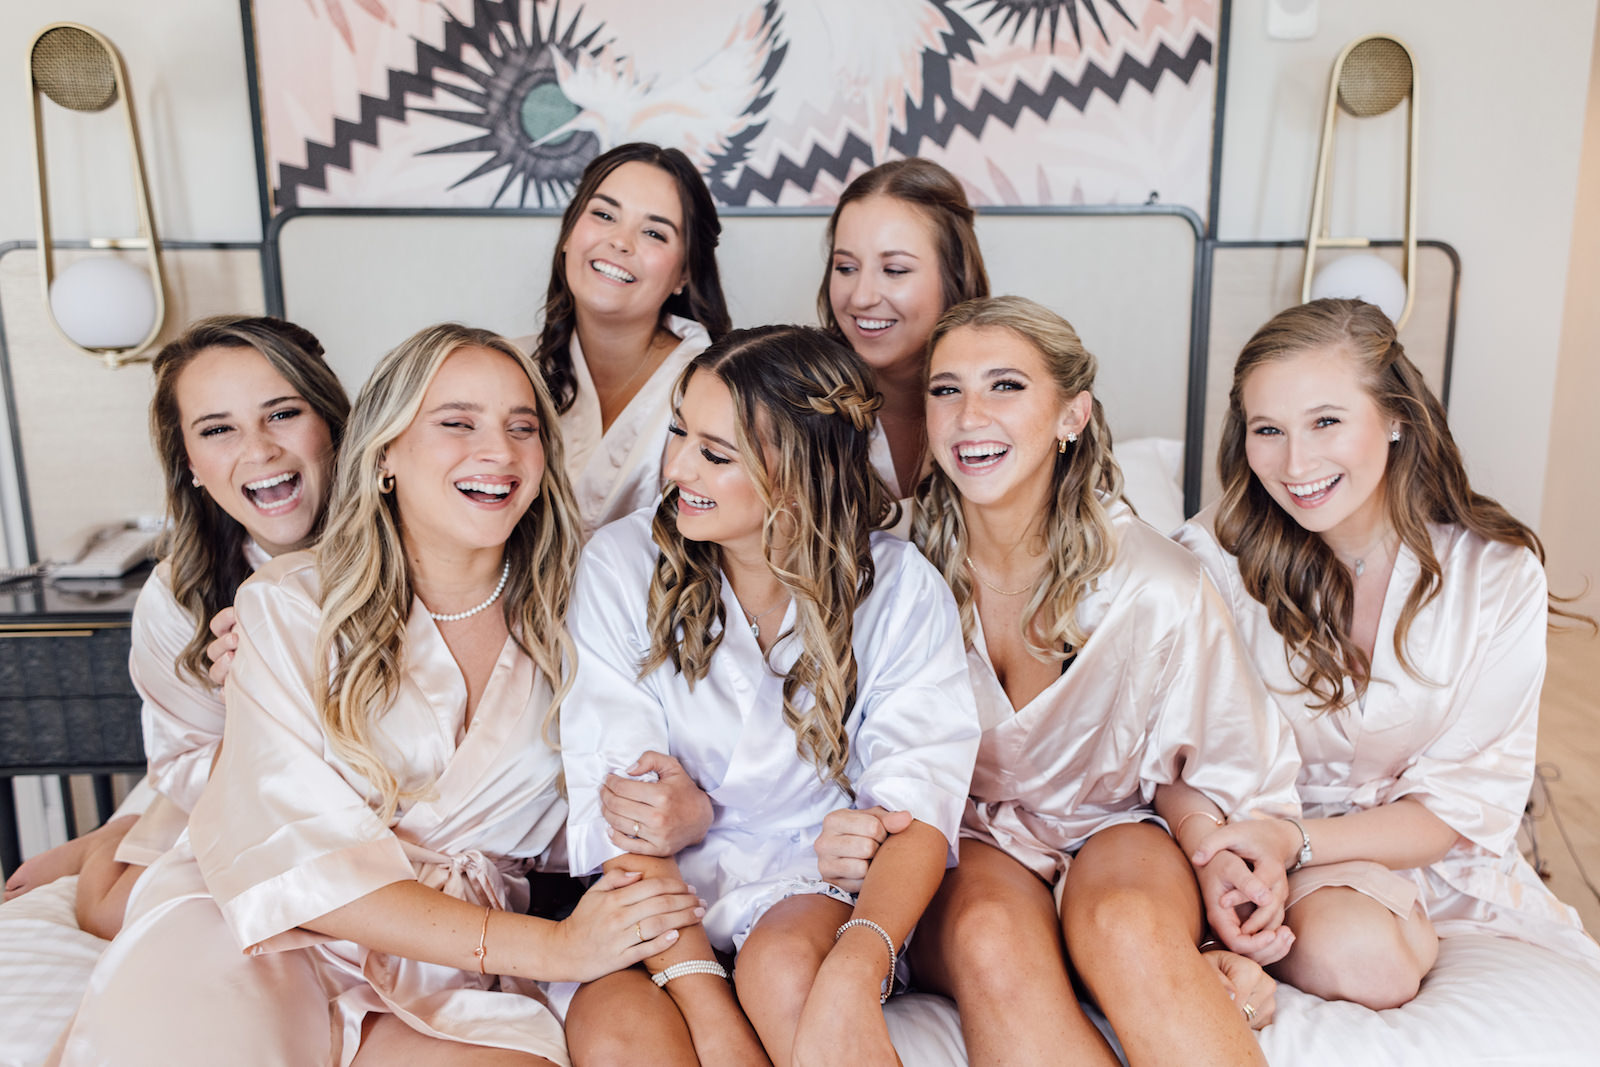 Bride and Bridesmaids Getting Ready in Silk Robes Wedding Portrait